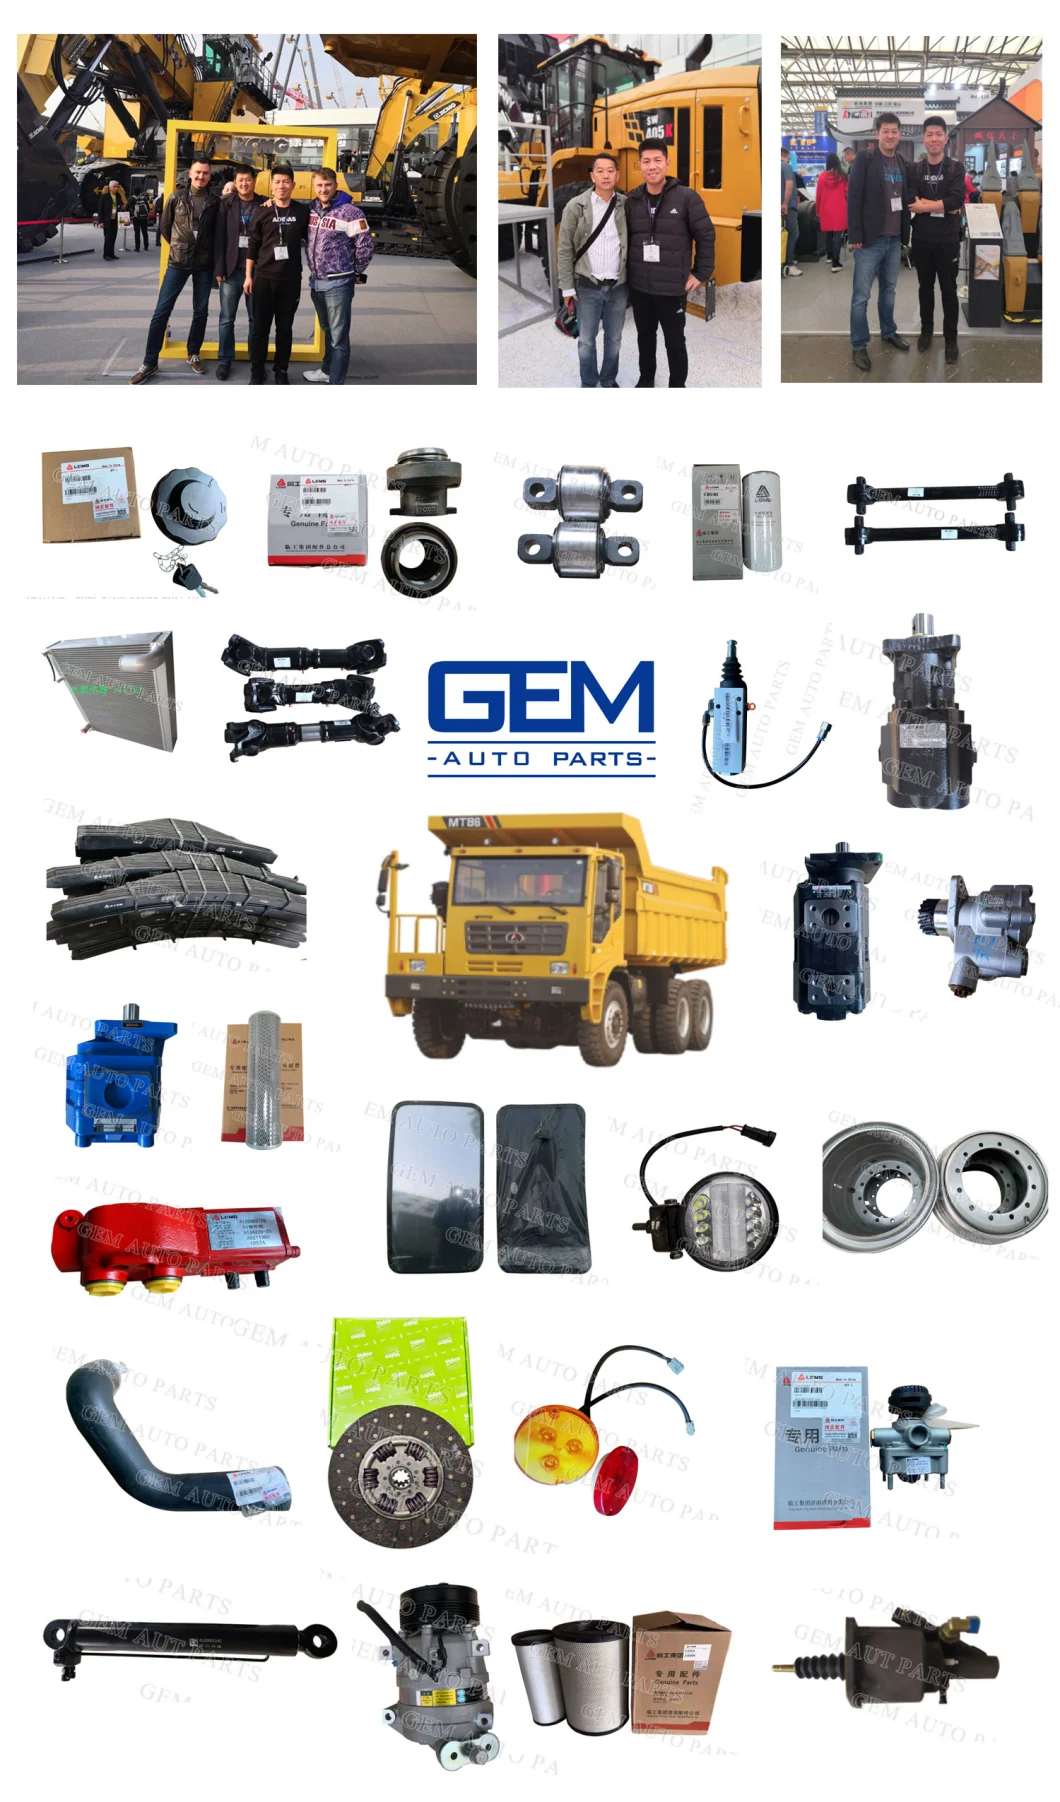 Expansion Water Tank for Lgmg Tongly Shacman Shantui Construction Machine Dump Truck Mining off Road Truck Spare Parts